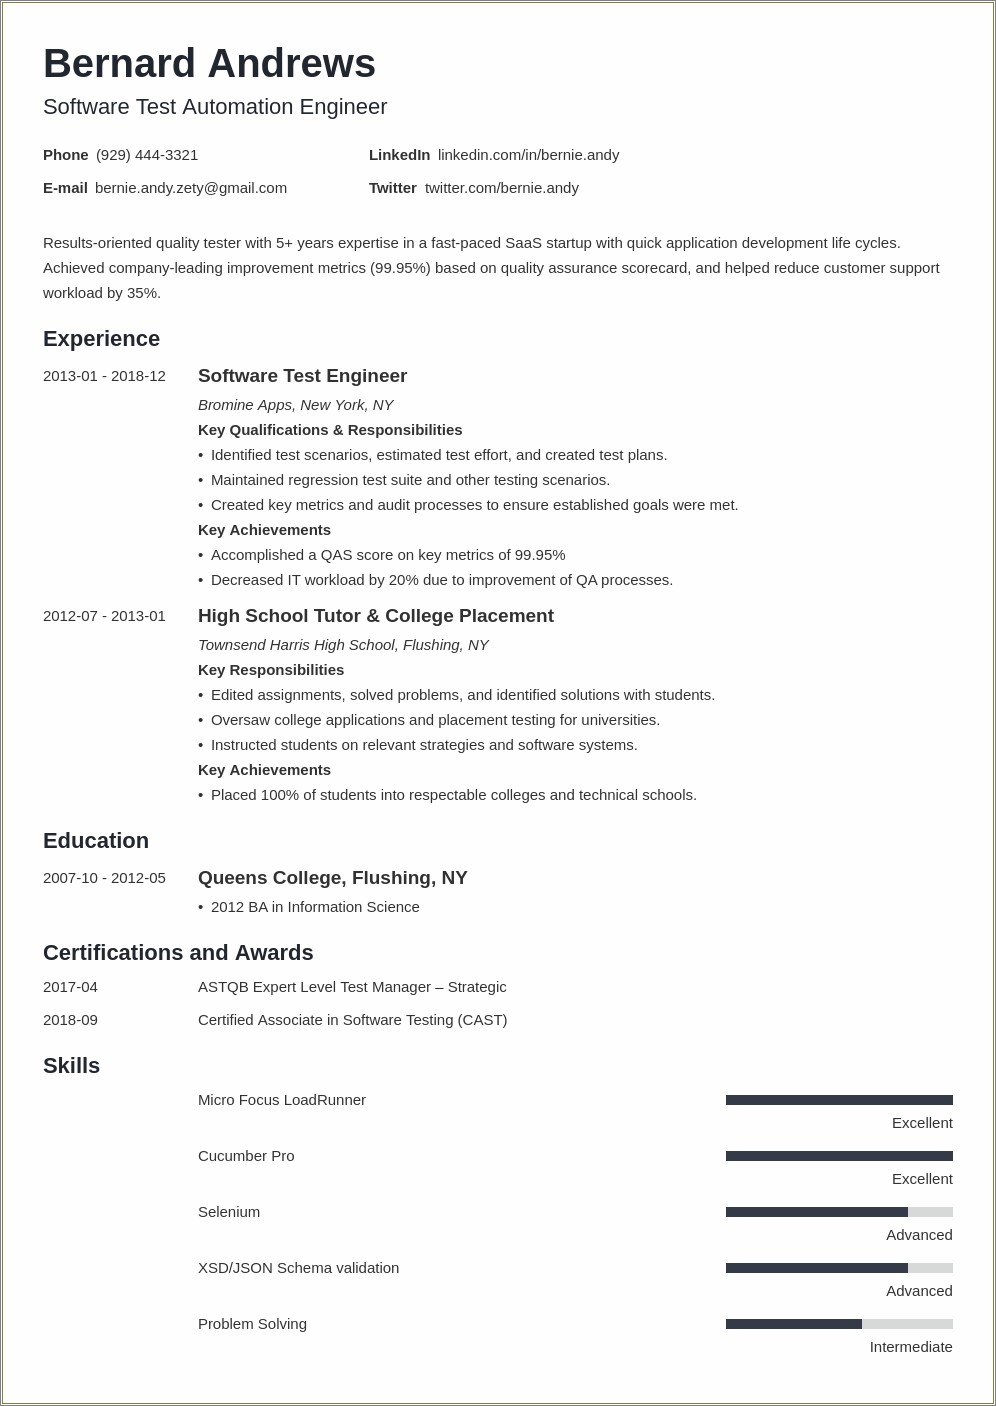 Adding Assessment Experience To A Resume